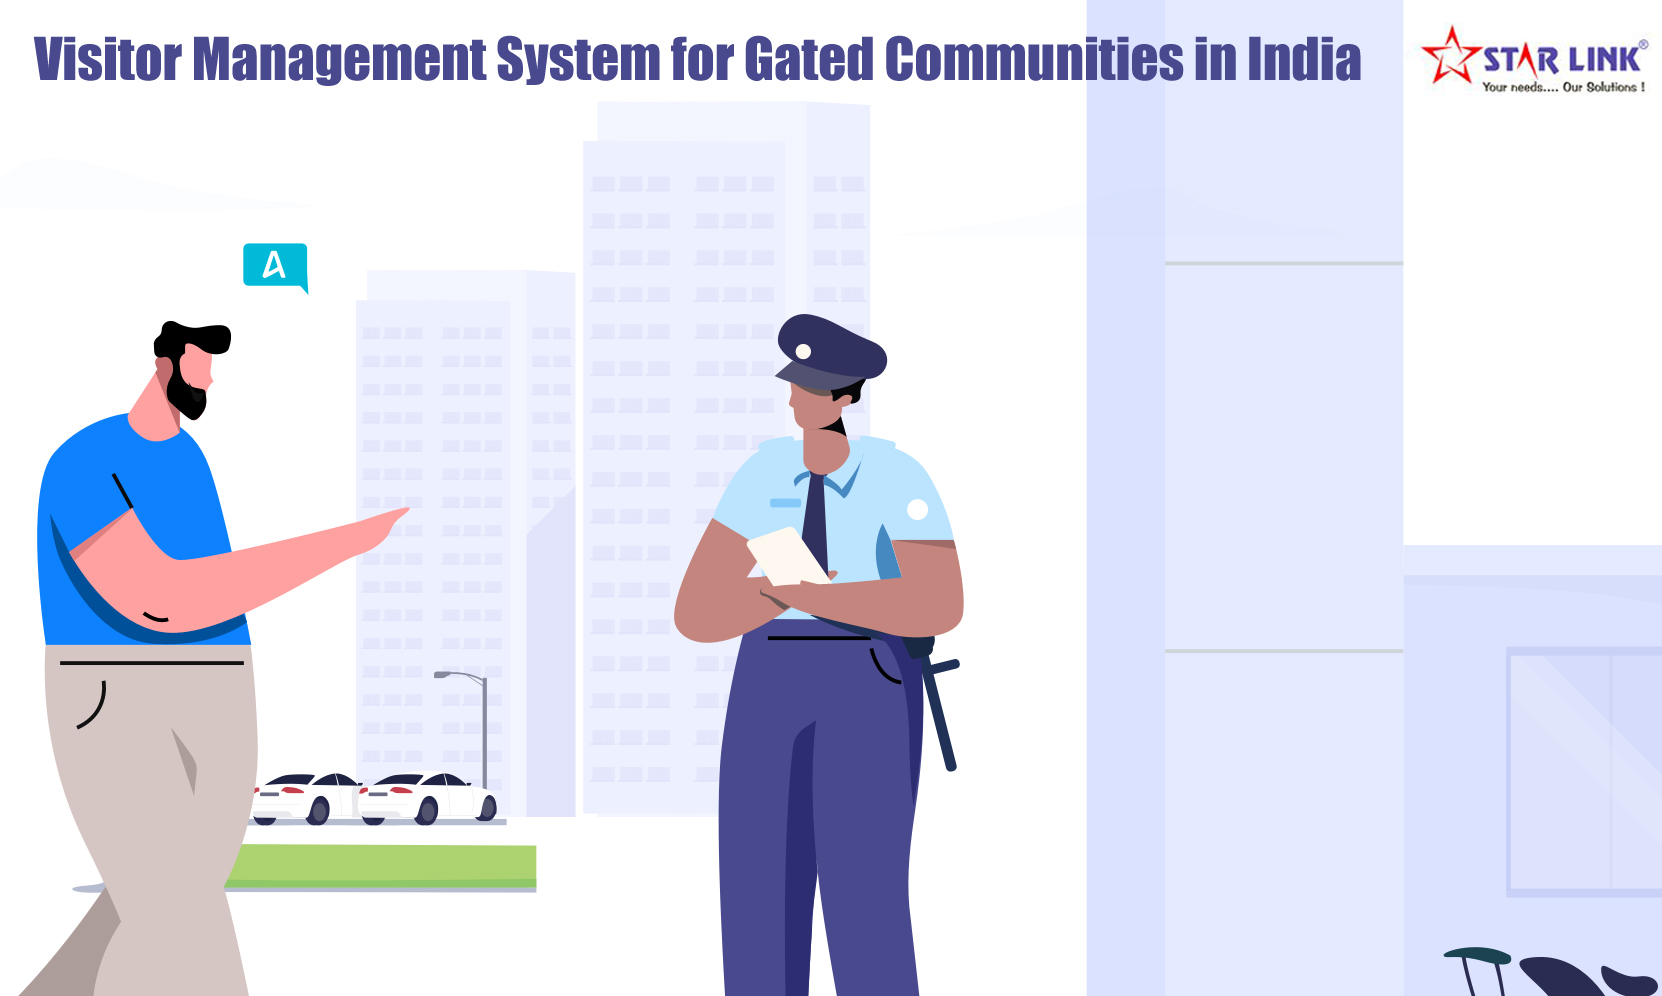 Visitor Management System for Gated Communities in India